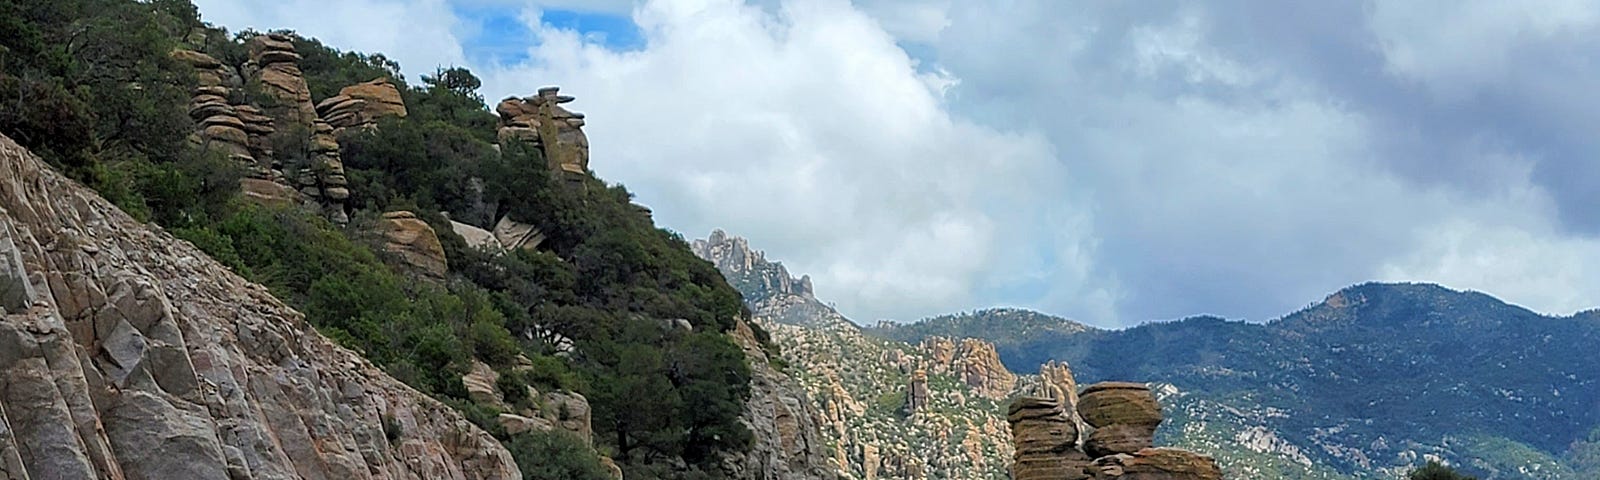 A winding highway going through hoodoo rock formations with green mountains and clouds in the background